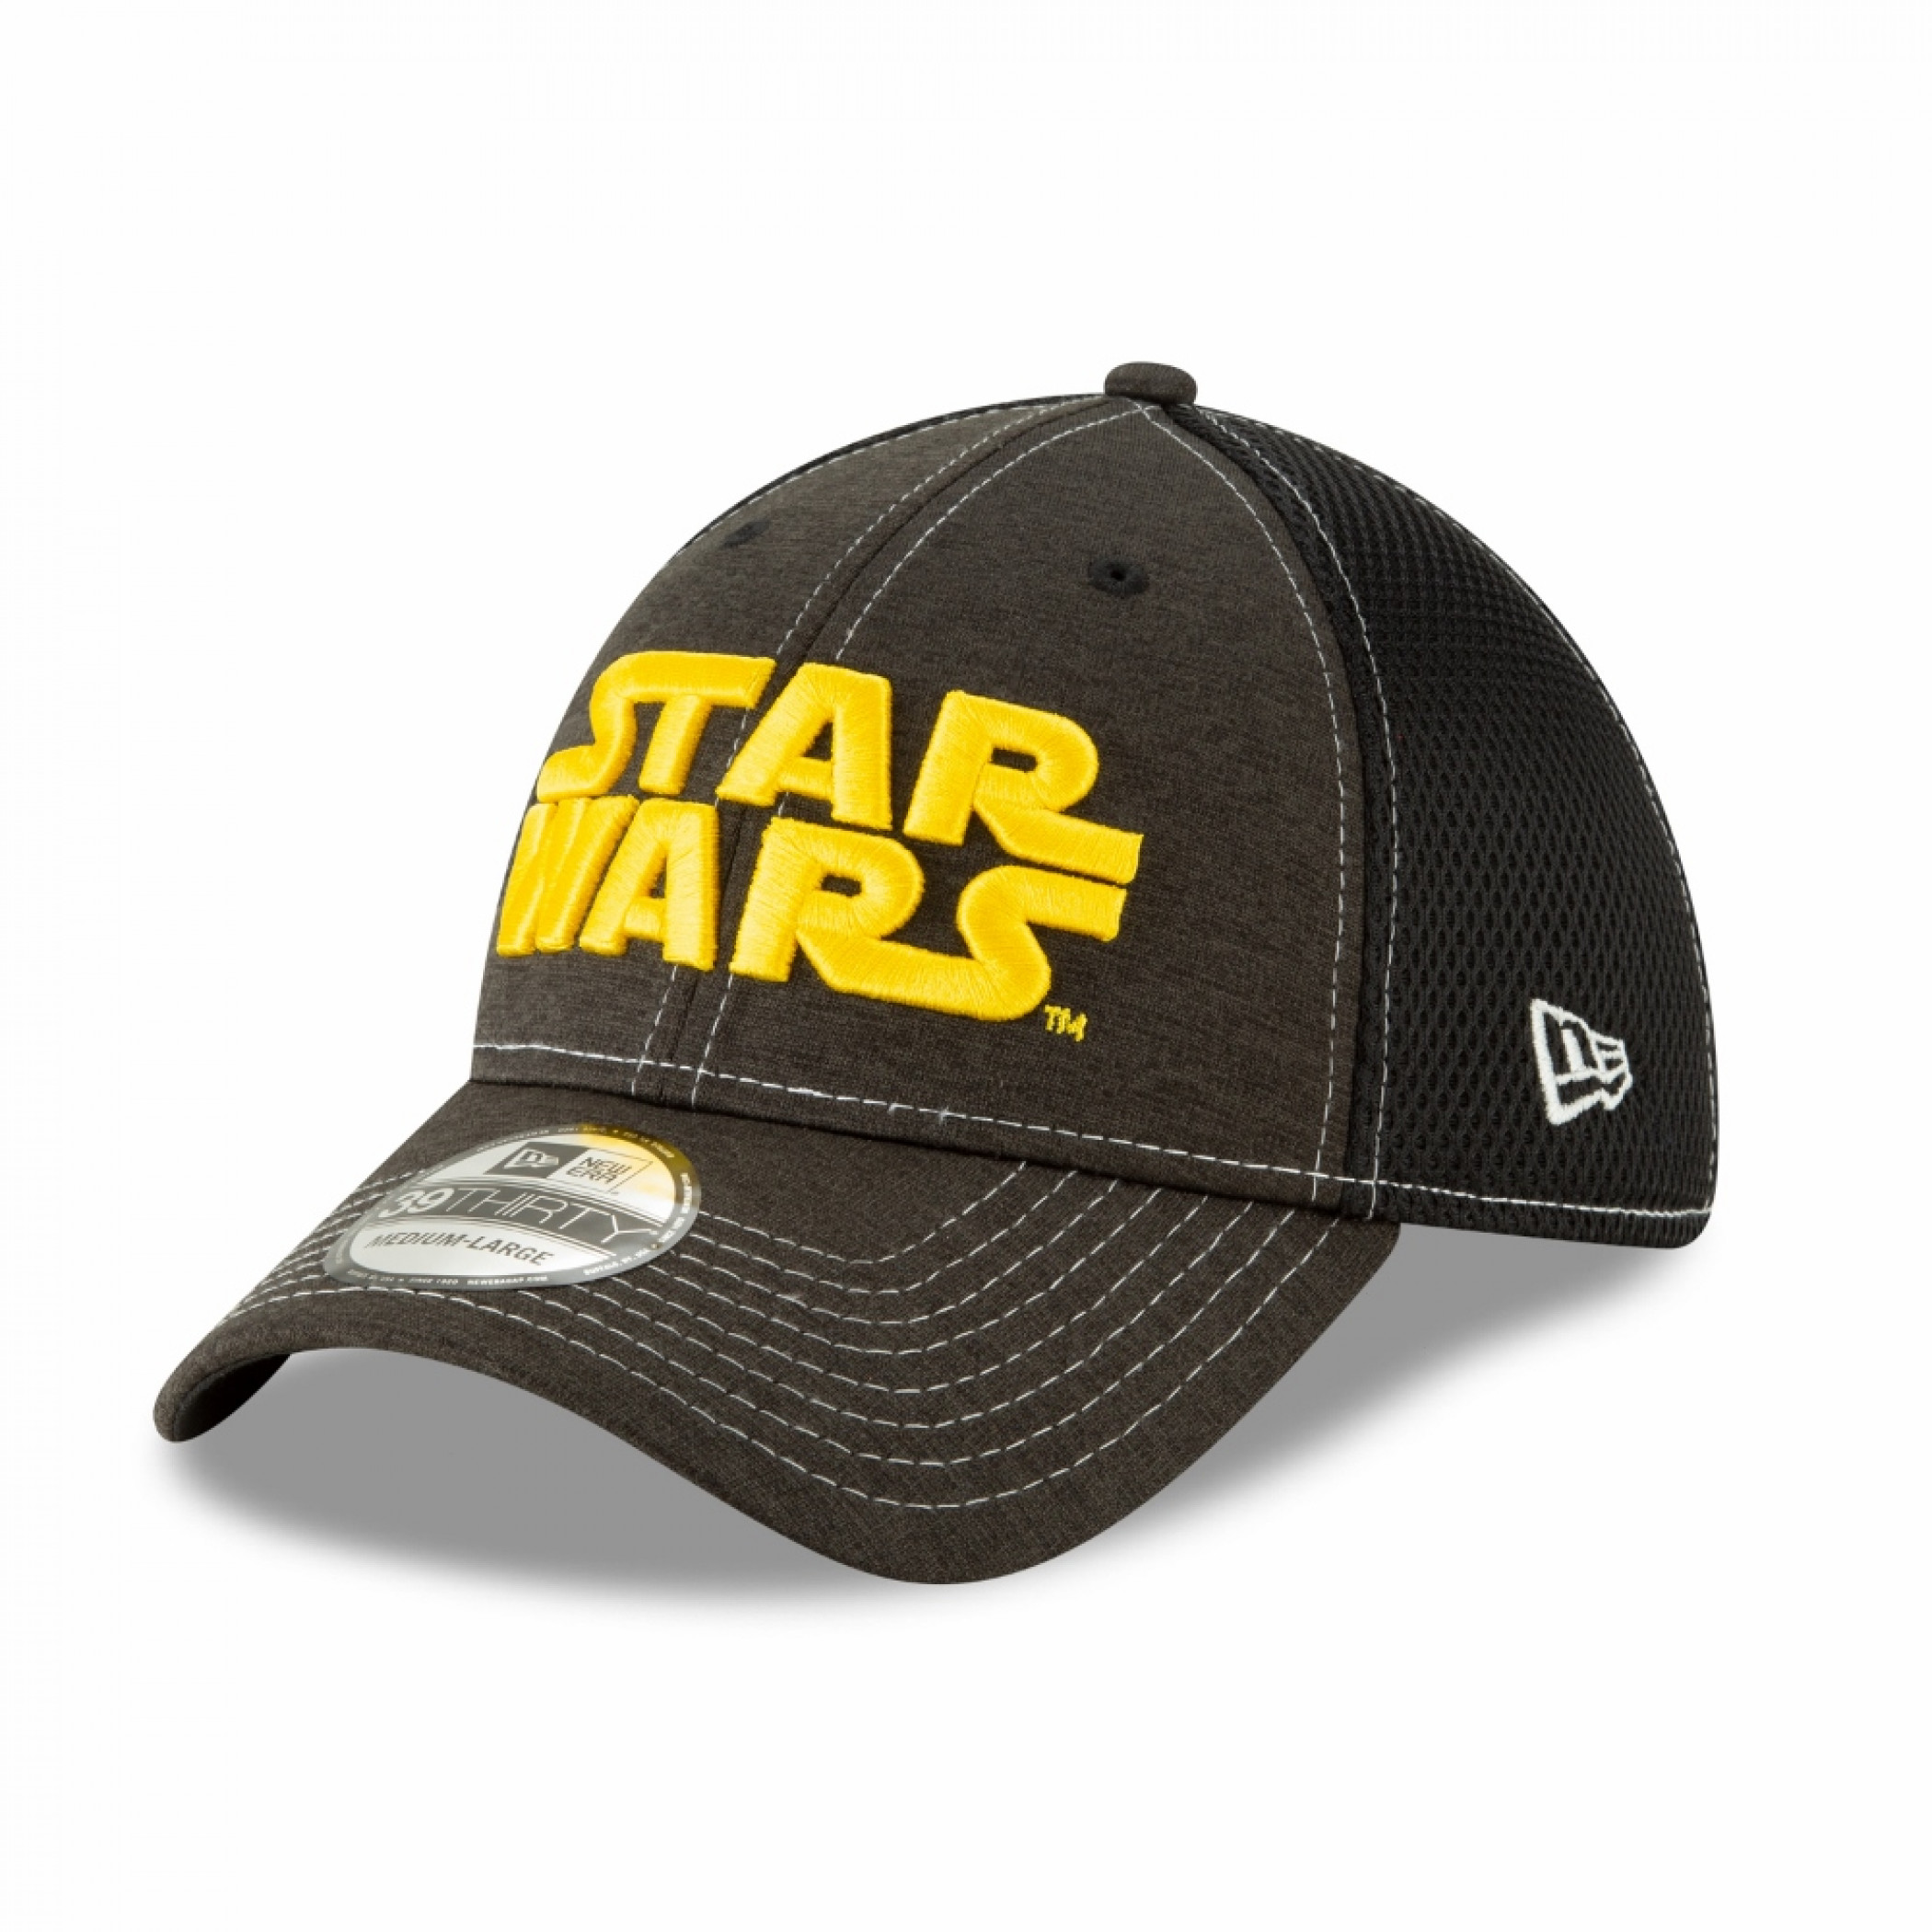 Star Wars Title Text Heathered New Era 39Thirty Fitted Hat